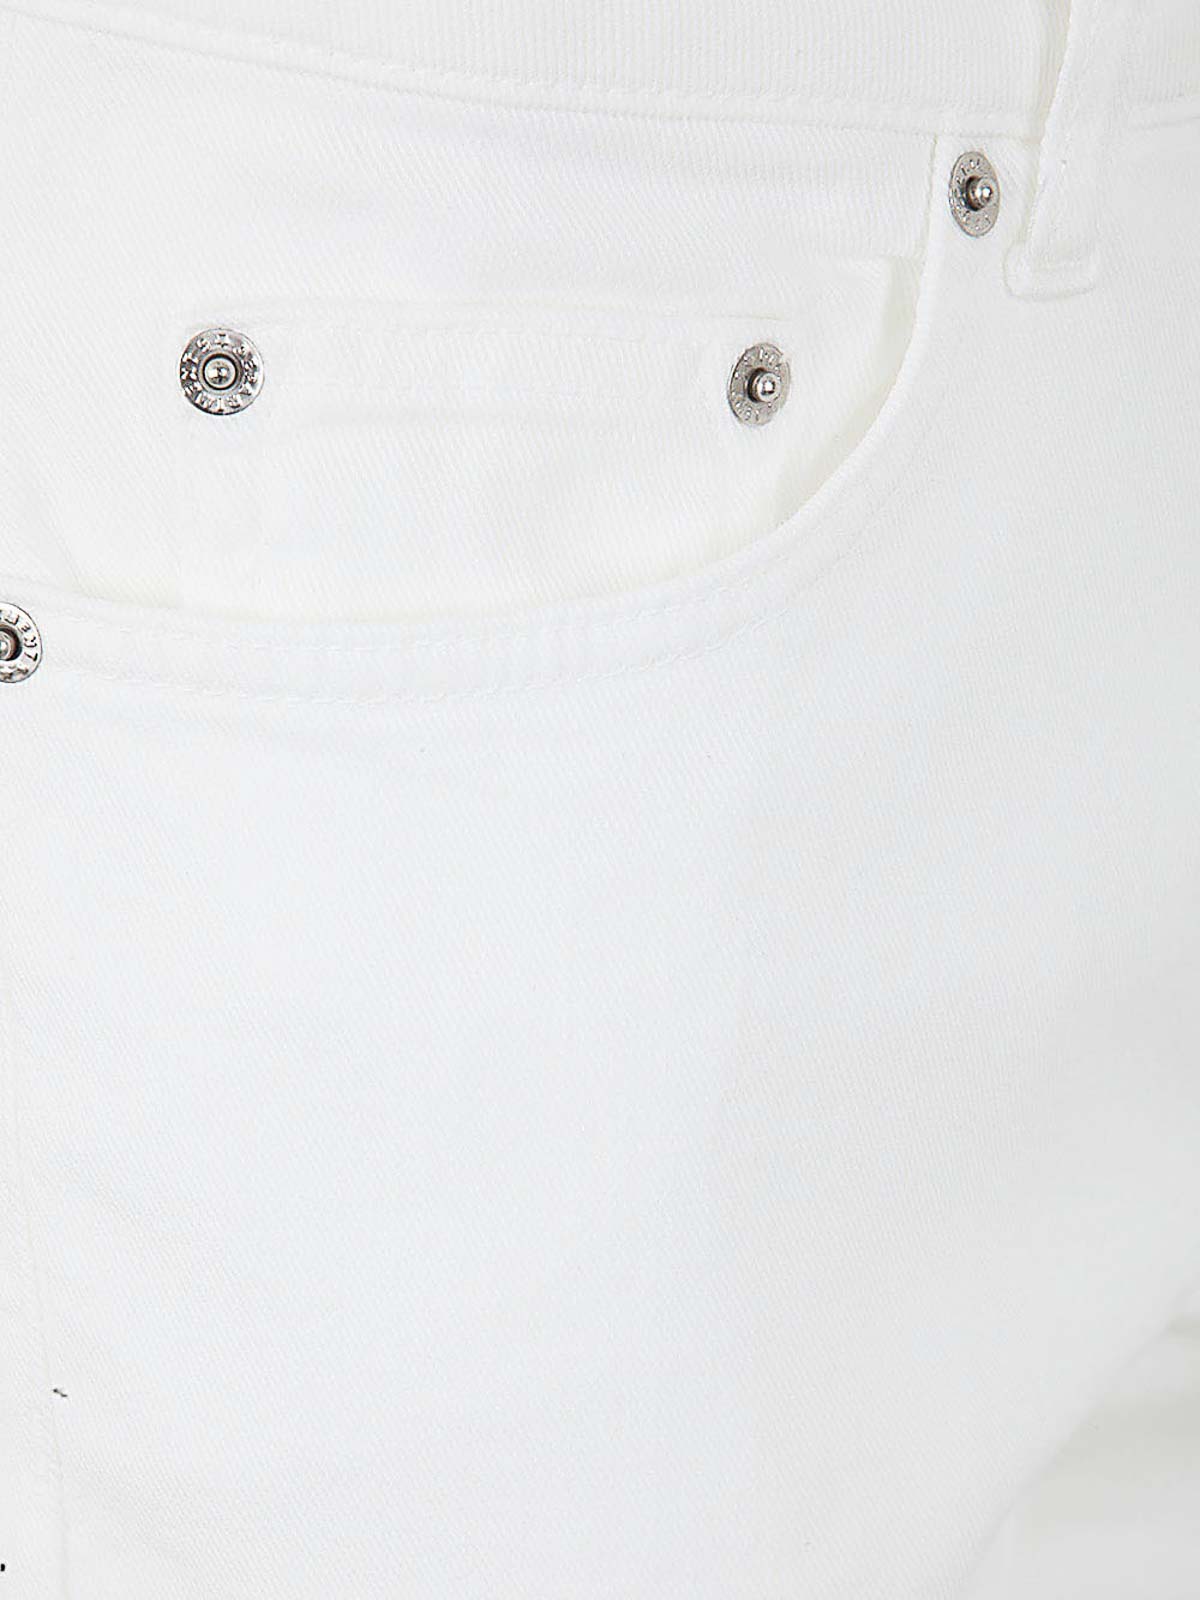 Shop Department 5 Drake Jeans In White